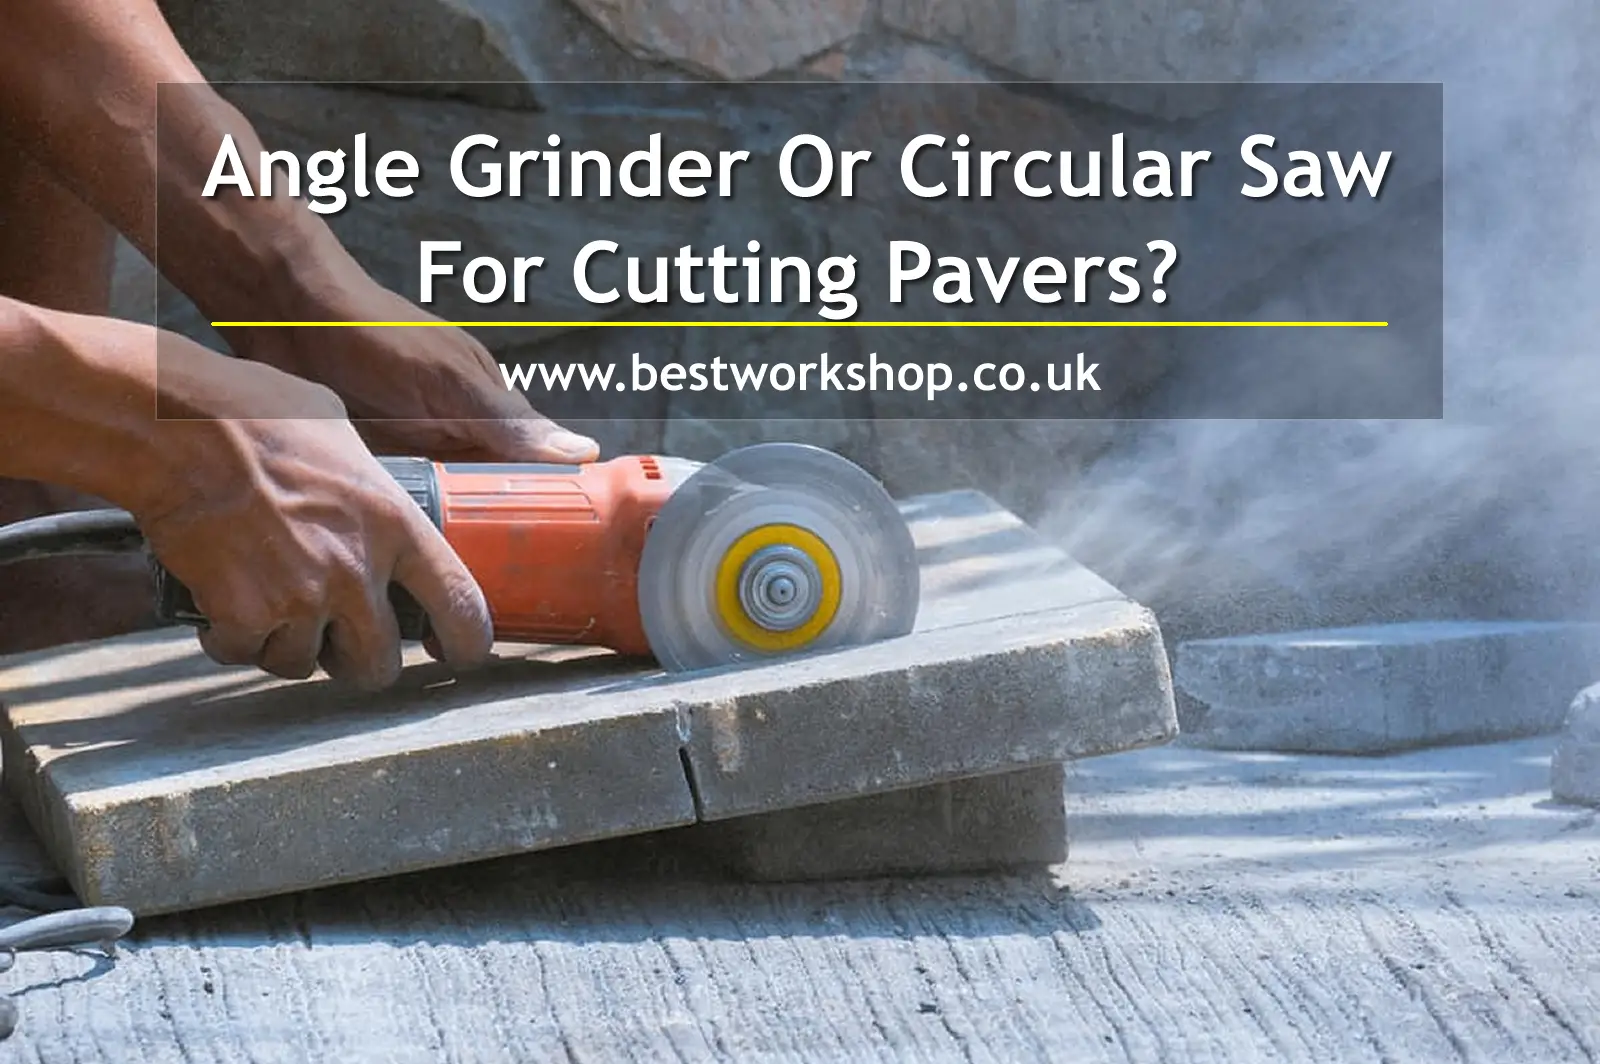 Angle Grinder Or Circular Saw For Cutting Pavers?